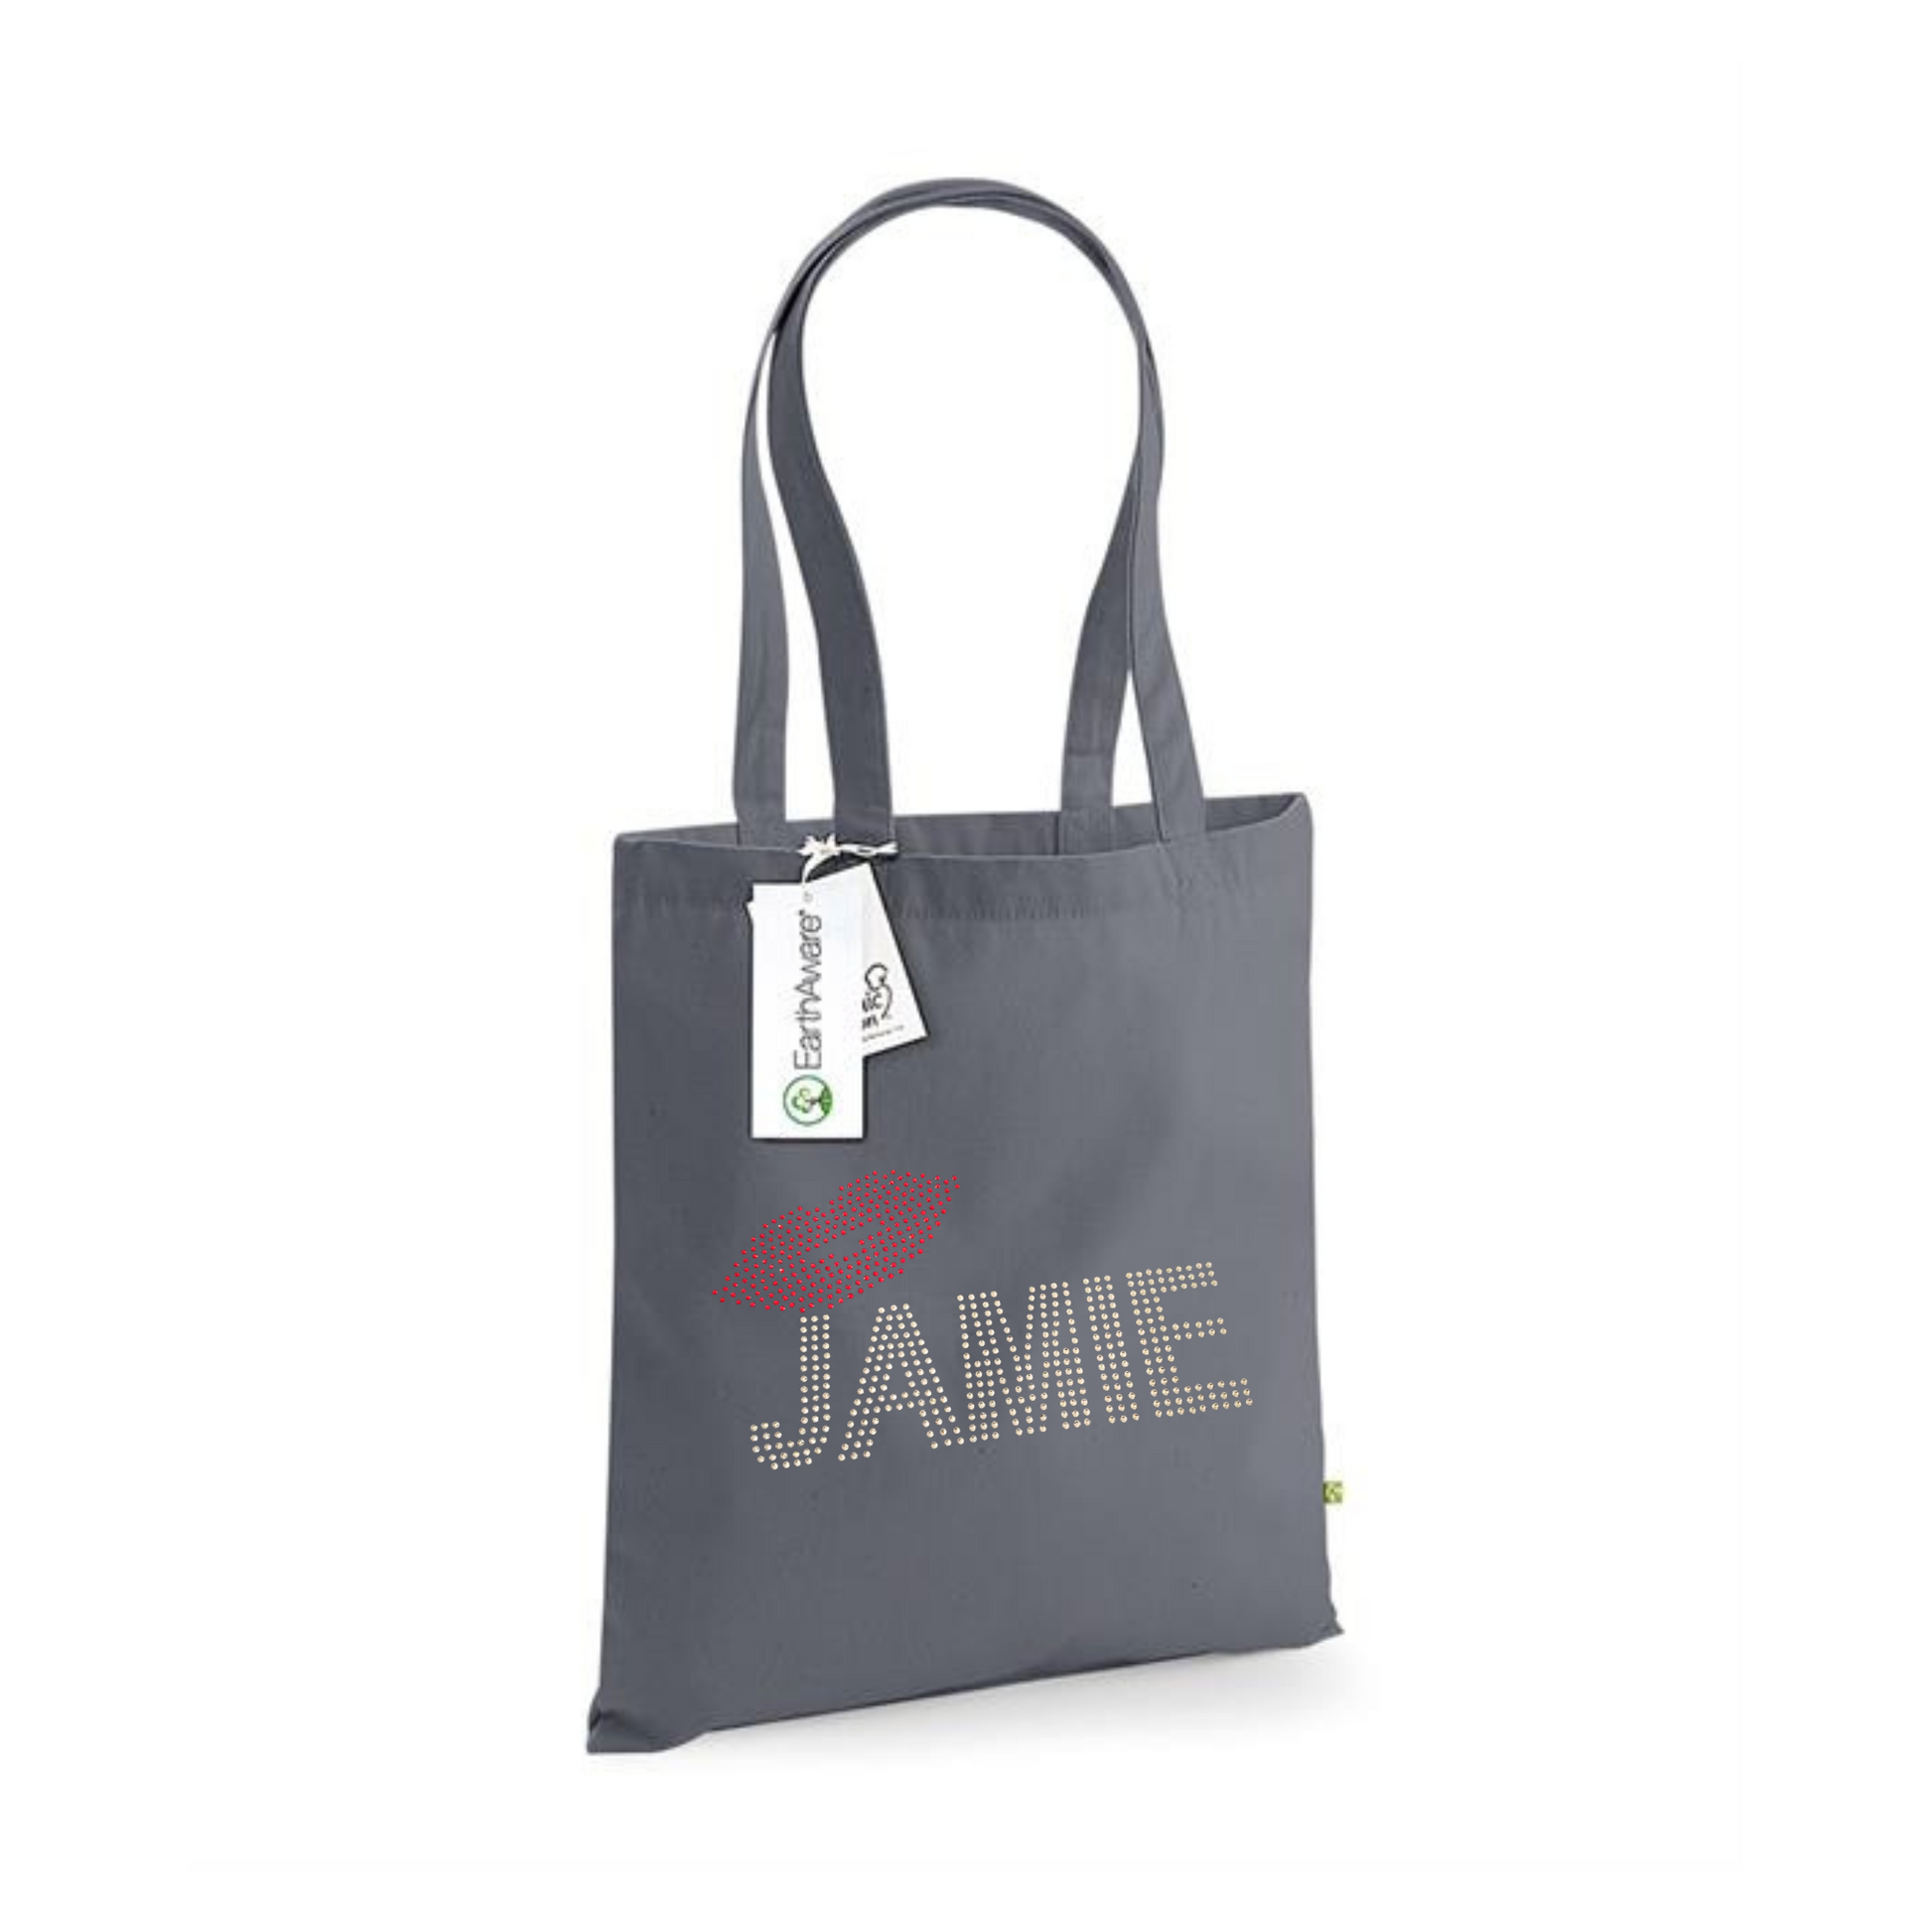 Strong dark grey rectangular tote bag with silver rhinestones detailing Jamie and red rhinestones lips, very sparkly